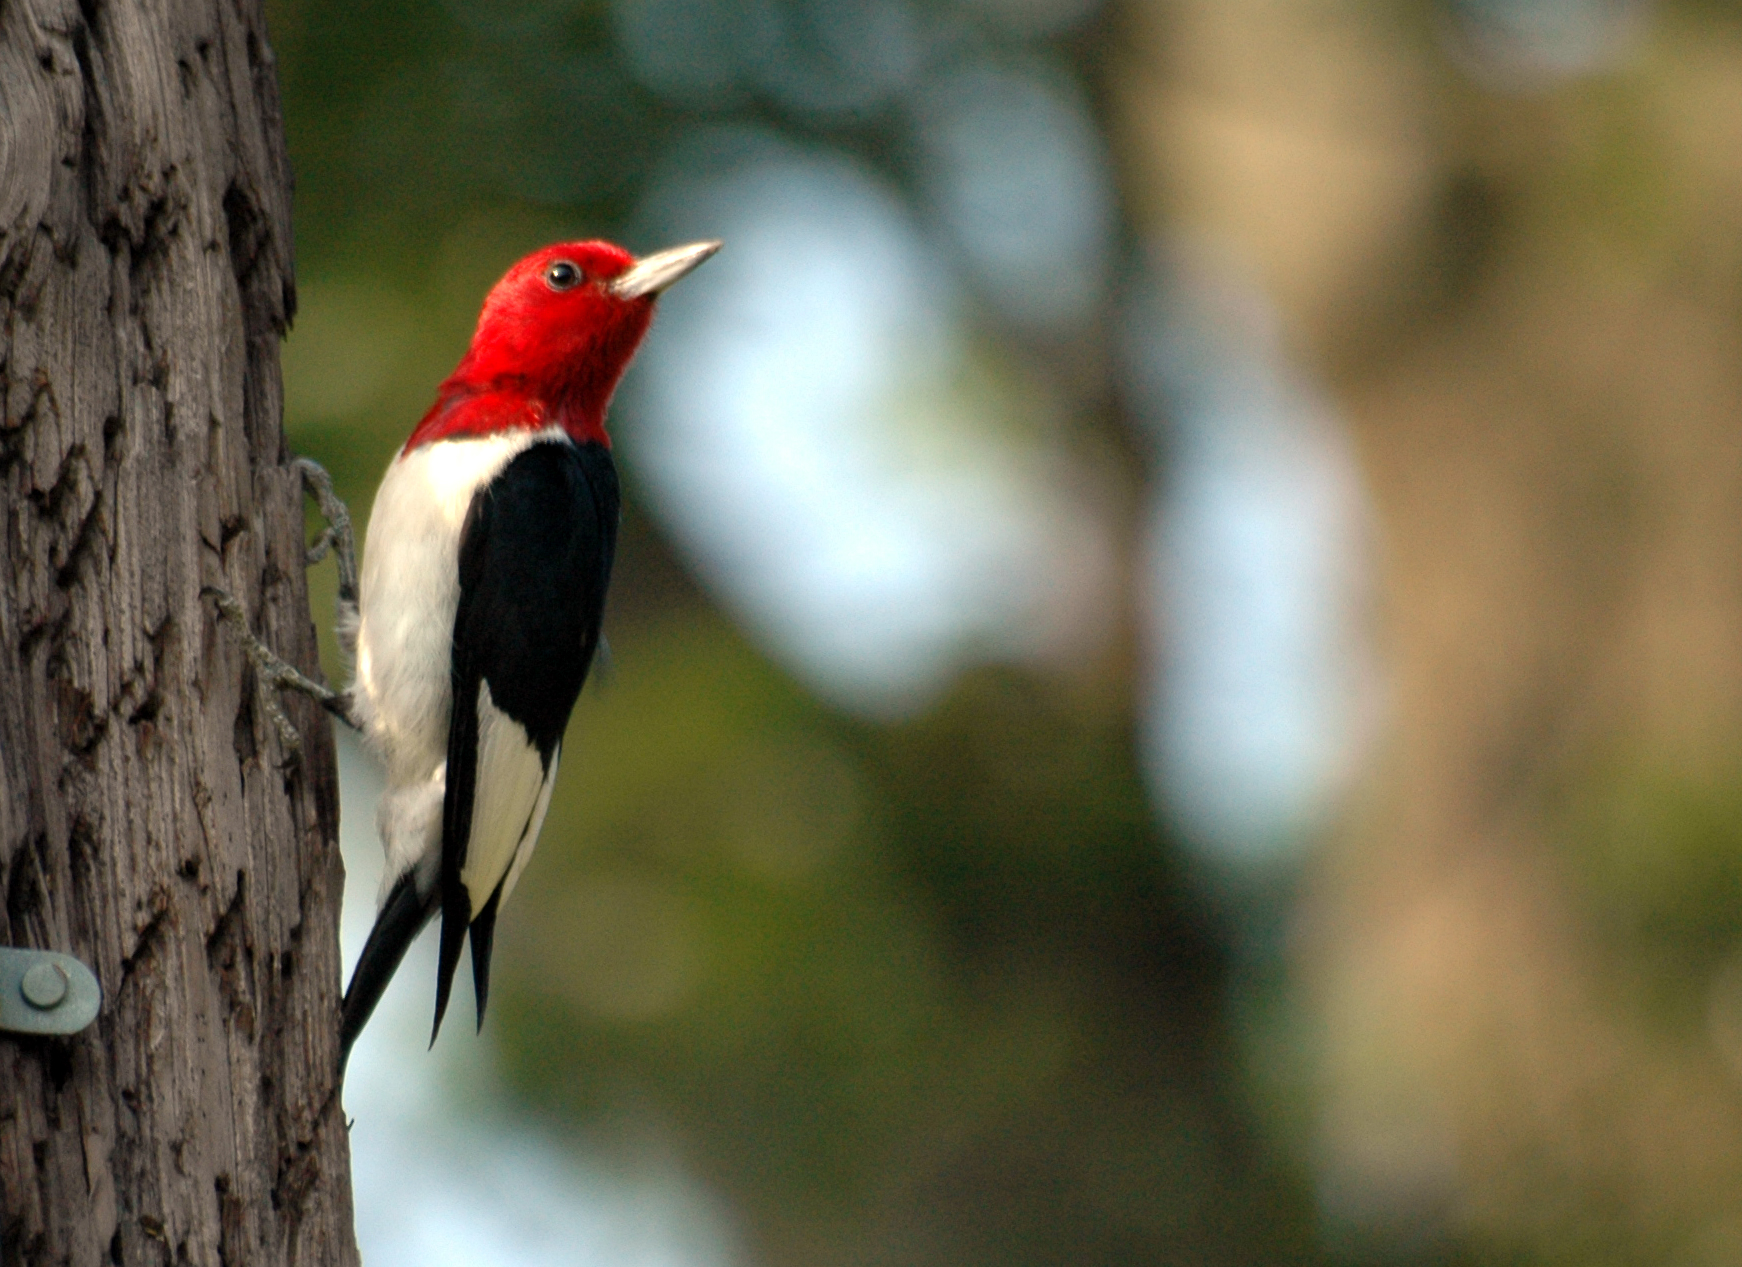 White and black bird with a crimson head, round, black eye and slender beak, looks over its shoulder as it clings to a tree trunk.  Red Headed Woodpecker